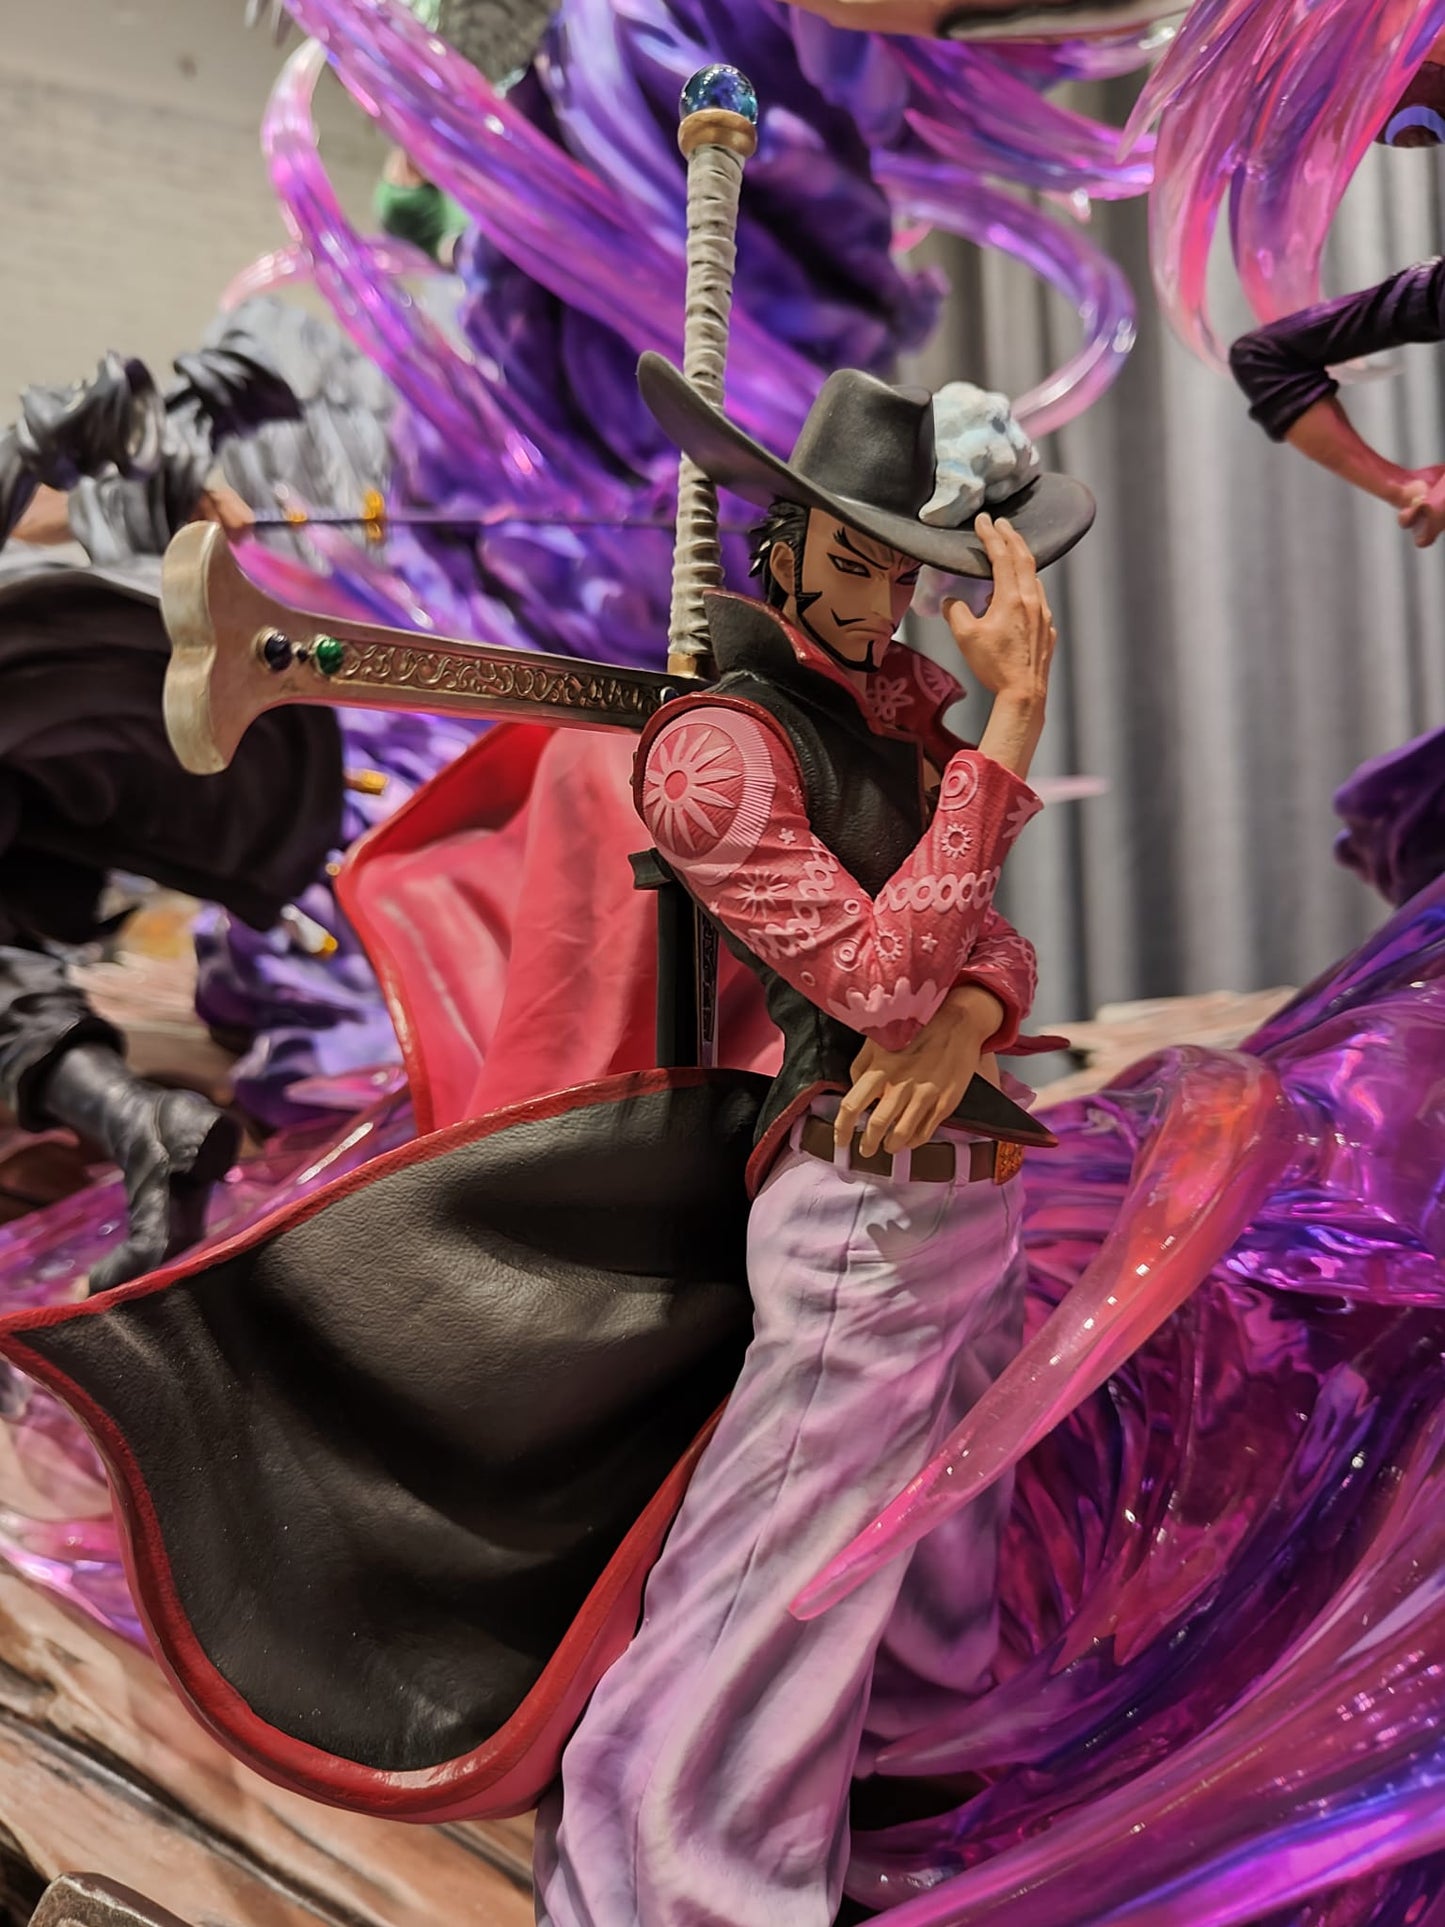 One Piece - Last Sleep Studio - Zoro with Villains Resin Statue (Special Order Only)